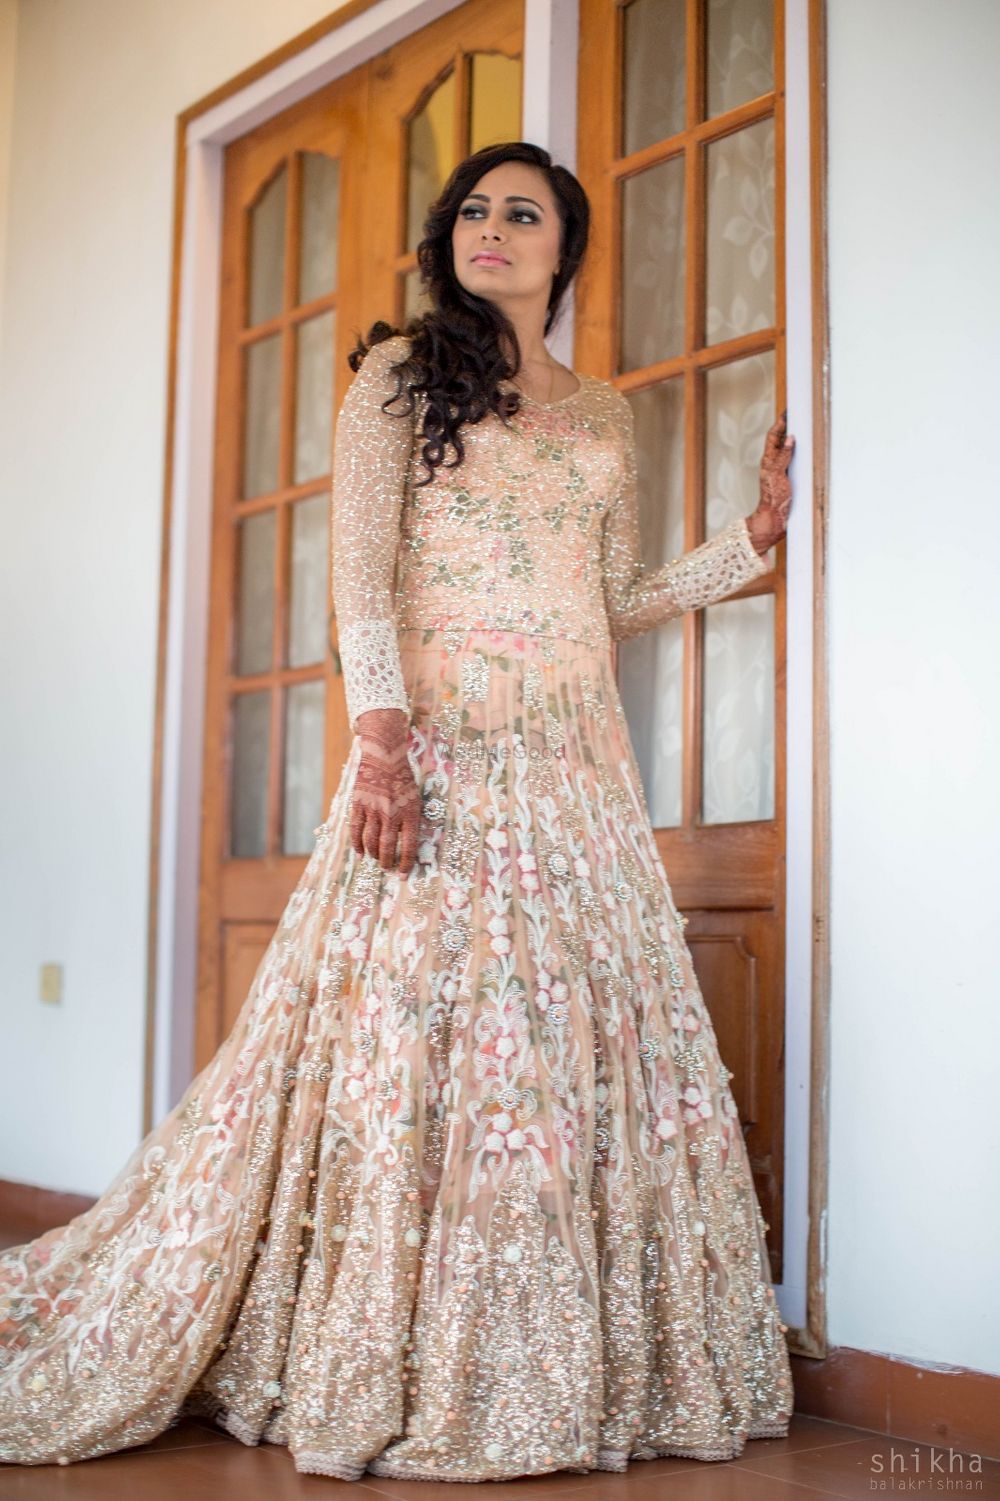 Photo of Peach engagement gown with floral embellishment